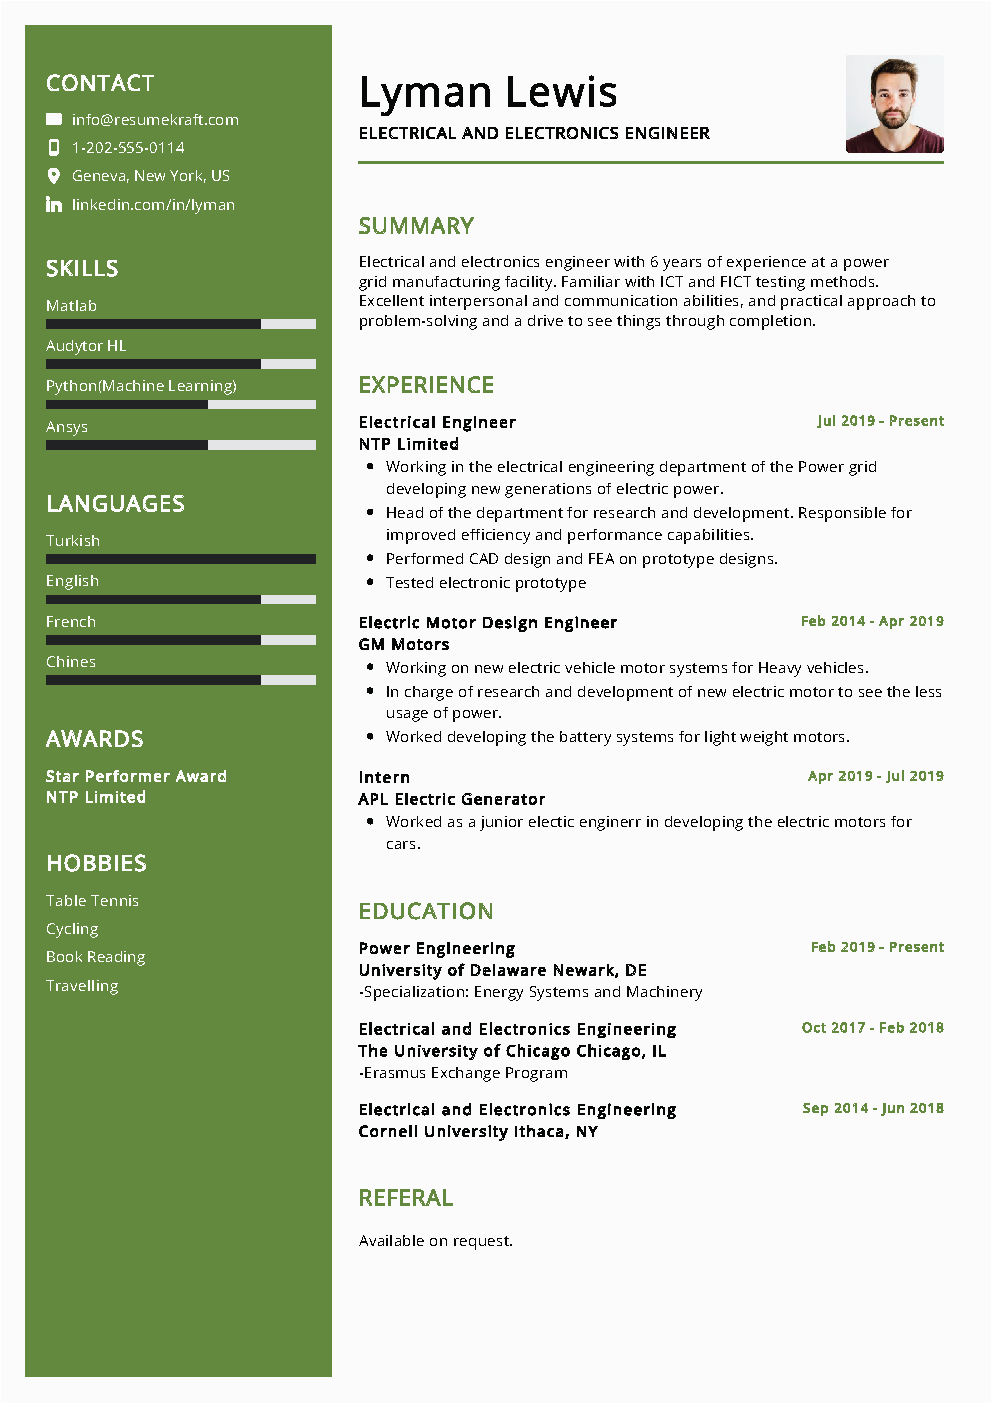 Sample Resume for Electrical and Electronics Engineer Electrical Engineer Resume Sample